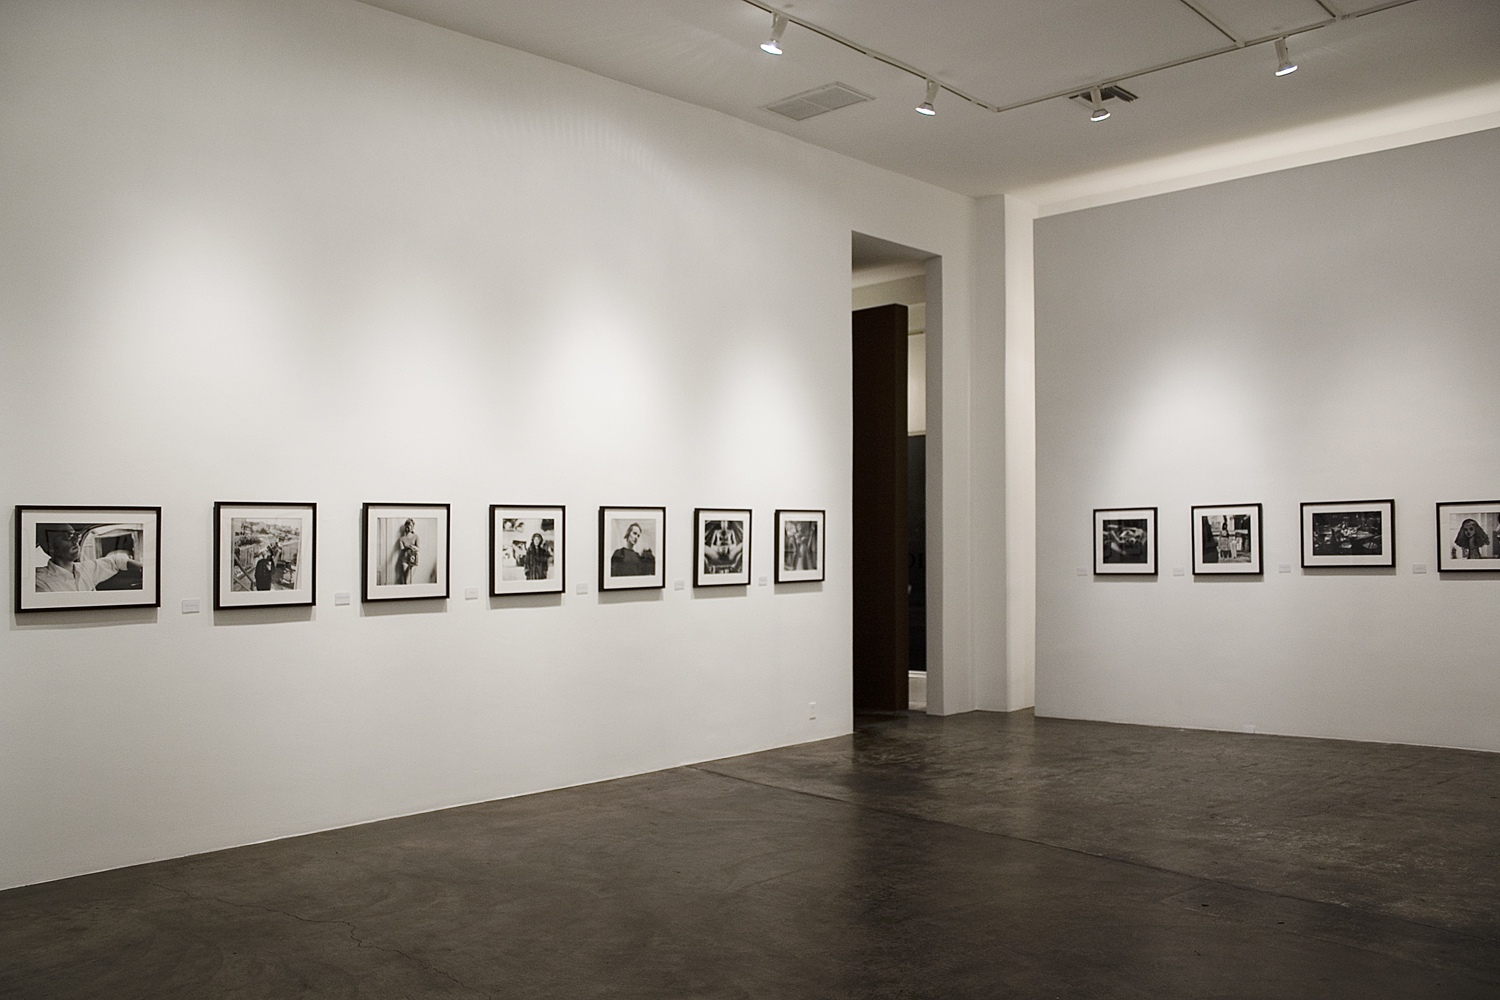 WALLACE BERMAN, Photographs and Other Works of Art: 1959-1976, November 30, 2007 – January 19, 2008